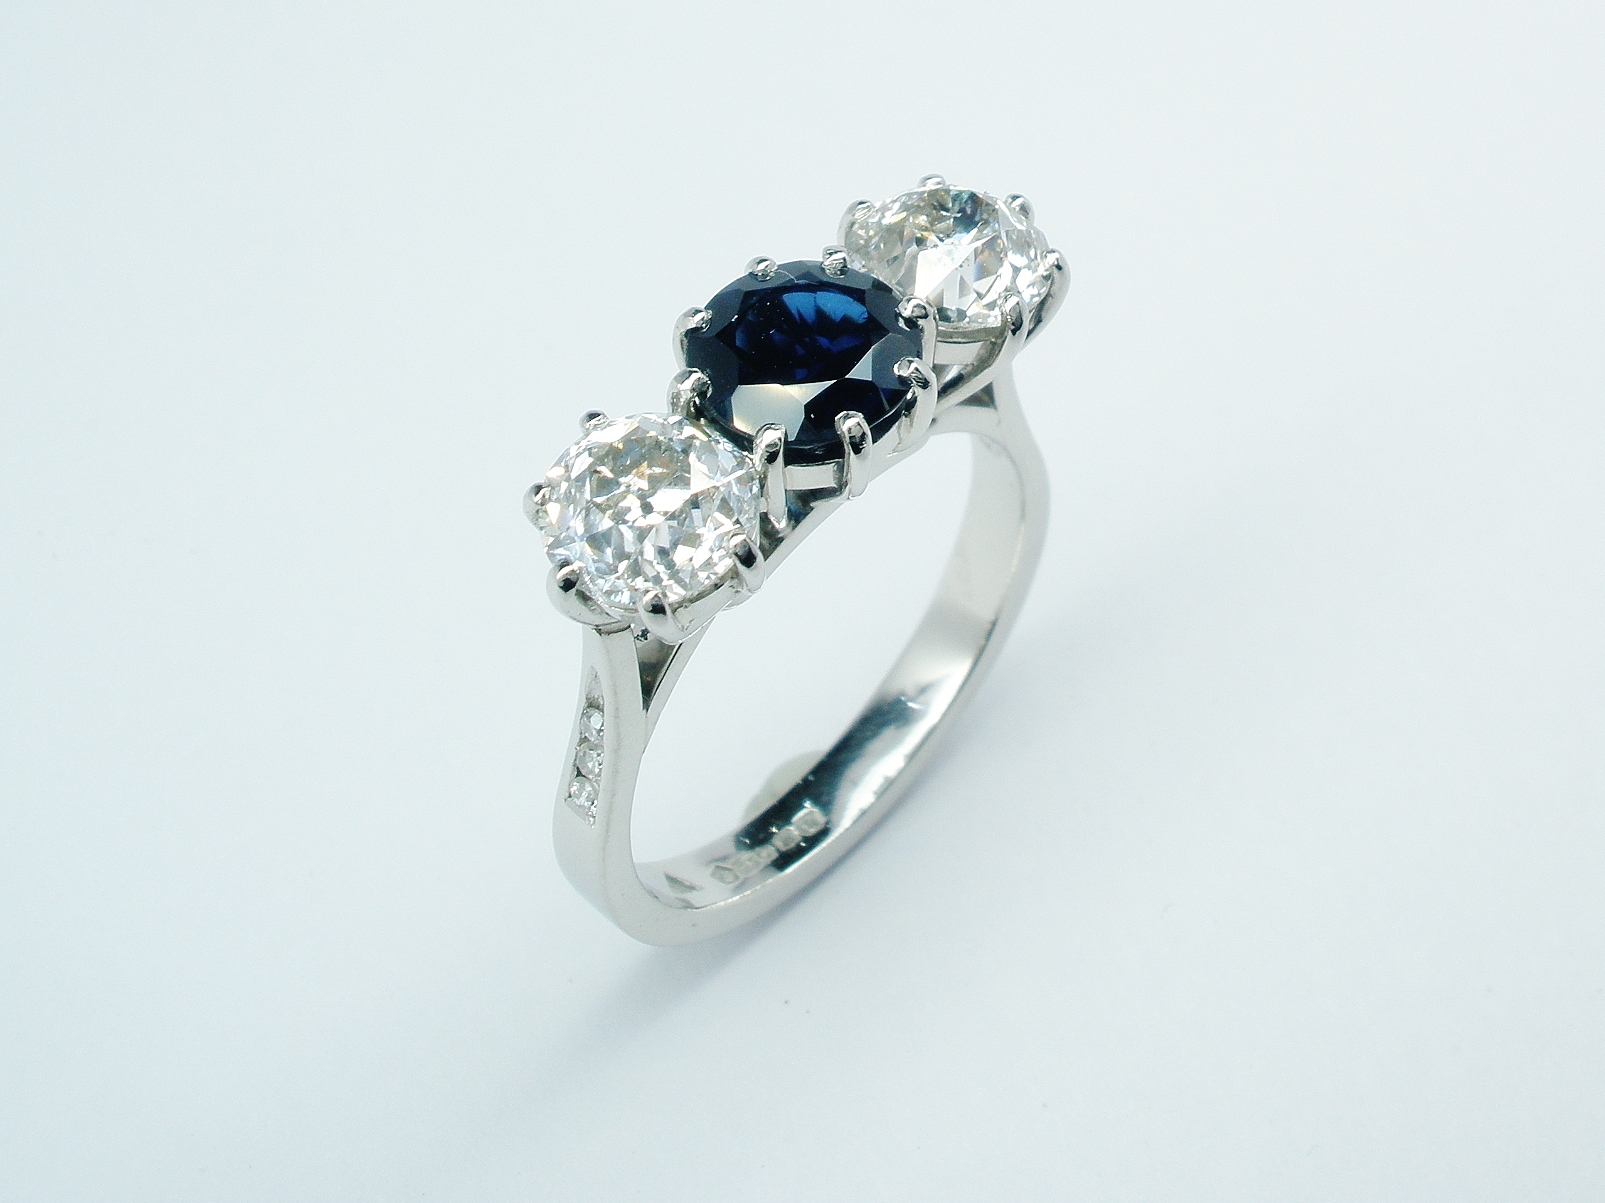 3 stone sapphire & diamond peg set ring mounted in platinum with small diamond channel set in the shoulders.